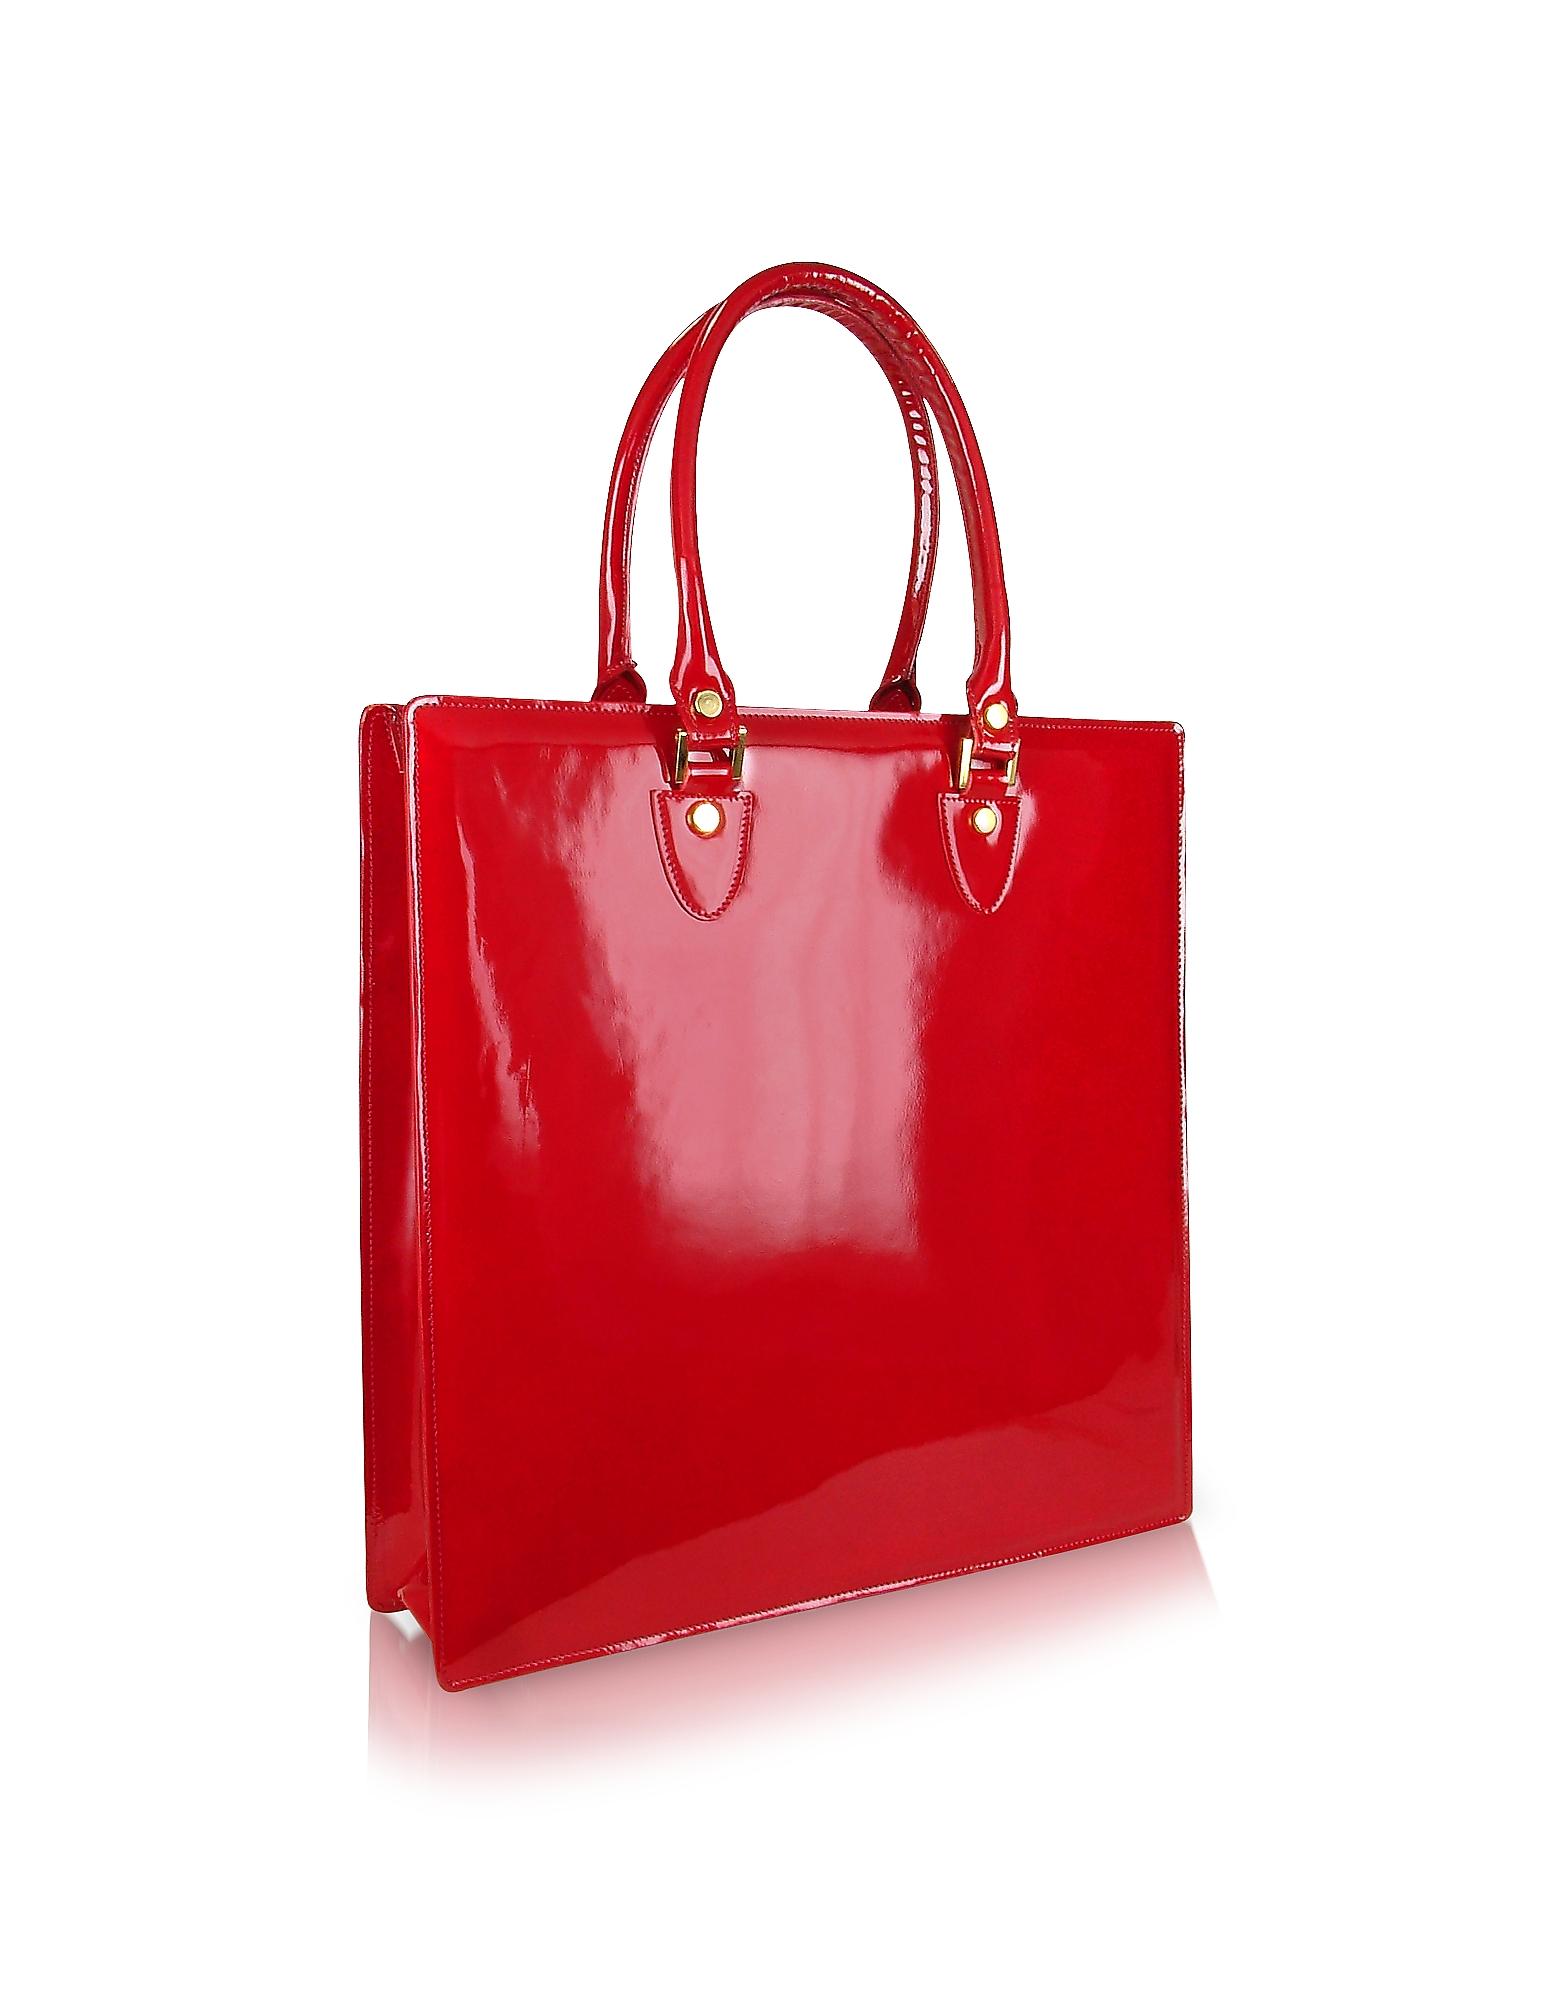 Lyst - L.A.P.A. Ruby Red Patent Leather Tote Bag in Red